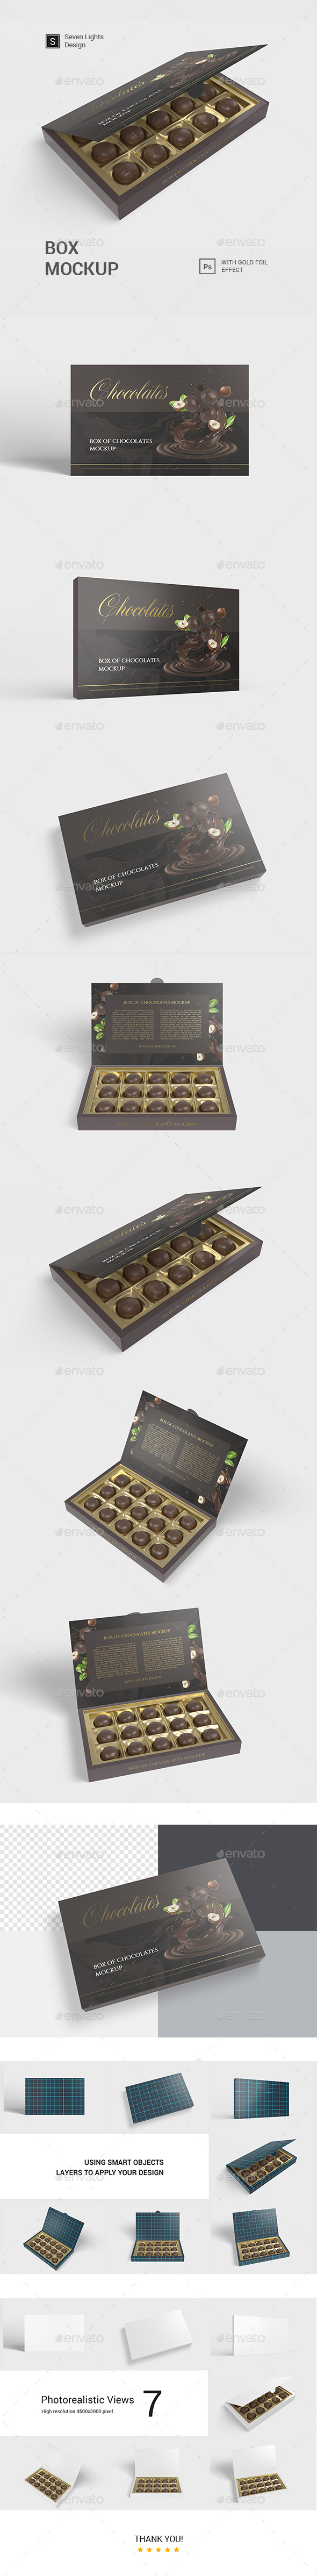 Download Box Of Chocolates Mockup By 7lights Graphicriver